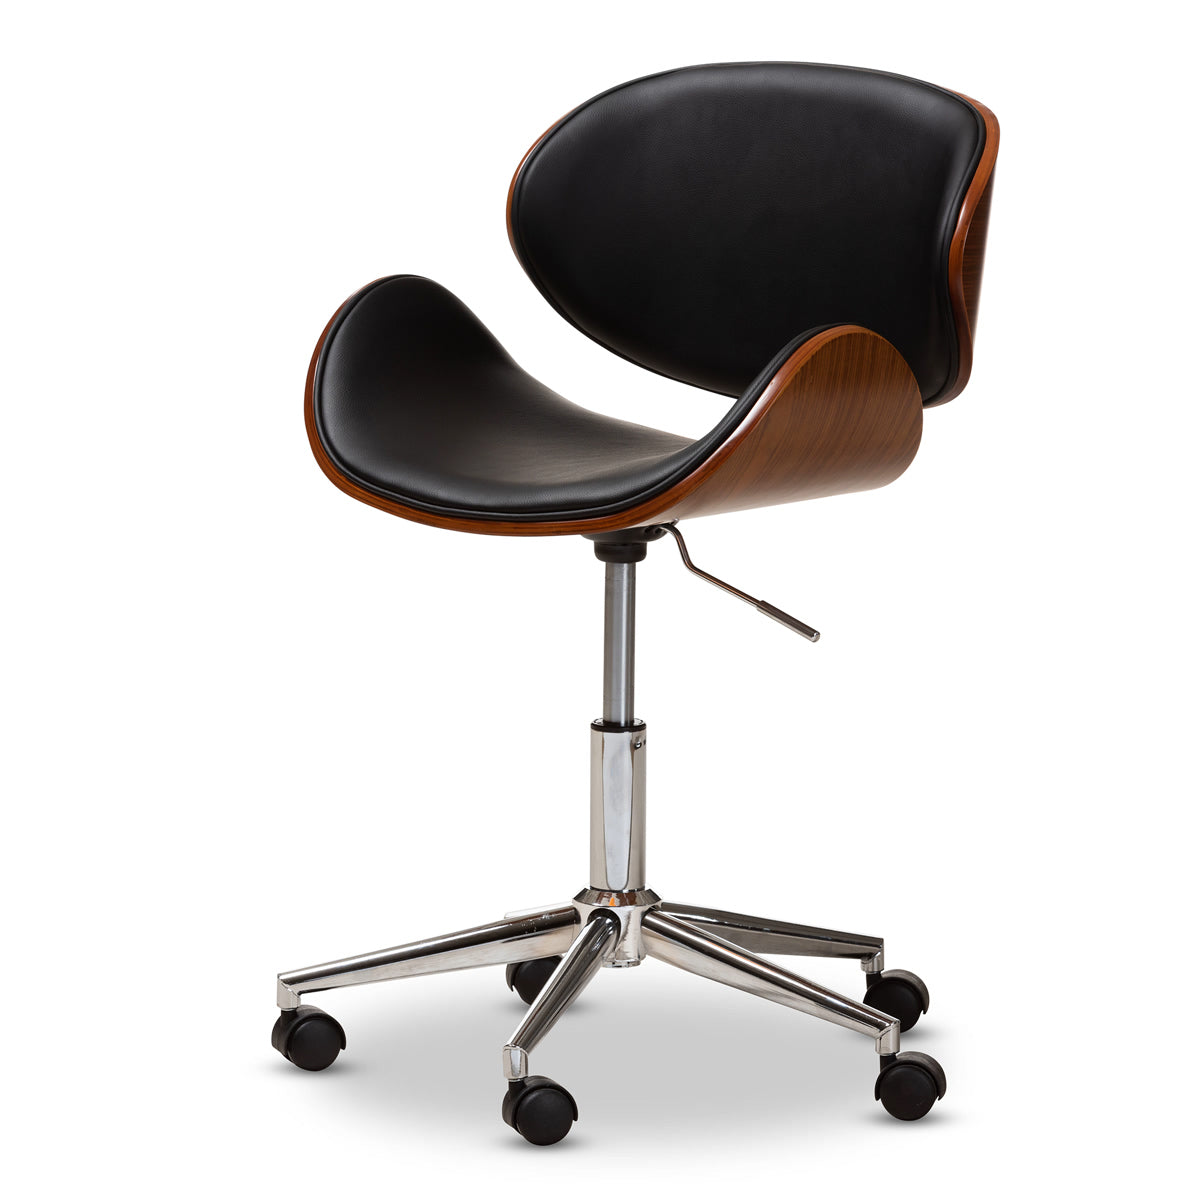 Baxton Studio Ambrosio Modern and Contemporary Black Faux Leather Upholstered Chrome-Finished Metal Adjustable Swivel Office Chair Baxton Studio-office chairs-Minimal And Modern - 1